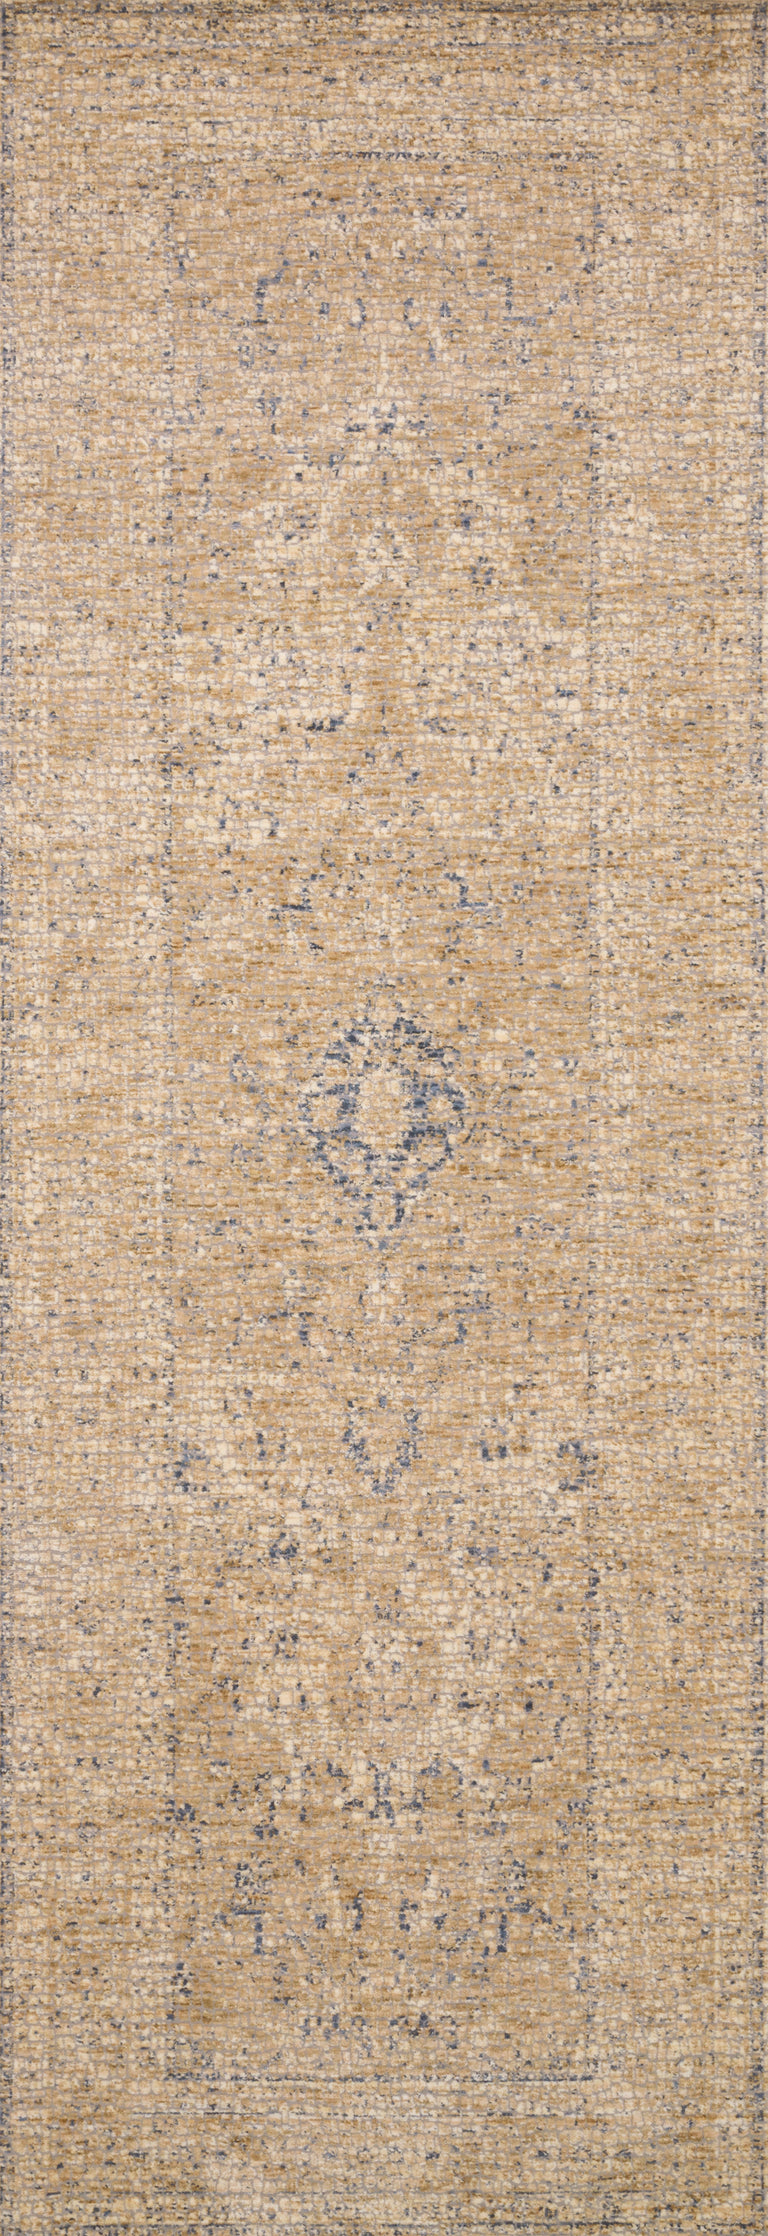 Loloi Rugs Porcia Collection Rug in Beige, Beige - 9'6" x 12'6"